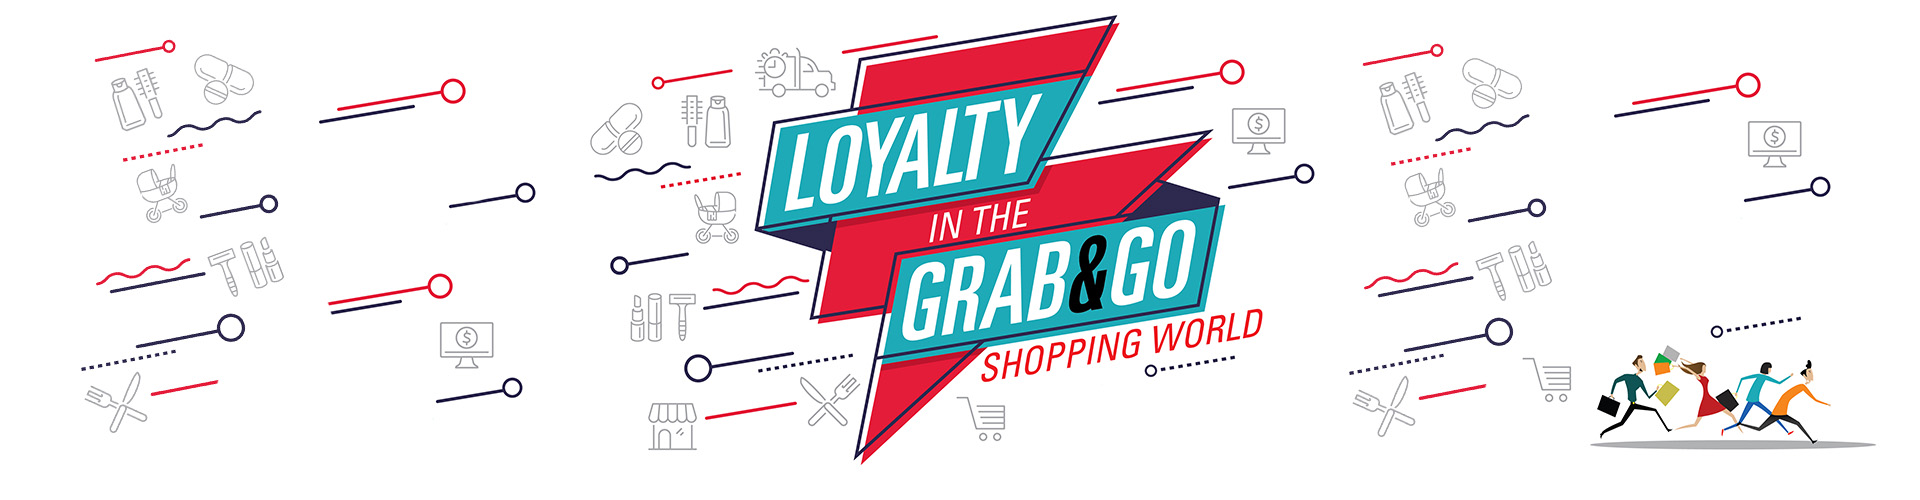 Loyalty in the Grab & Go Shopping World Vector banner with title and icons